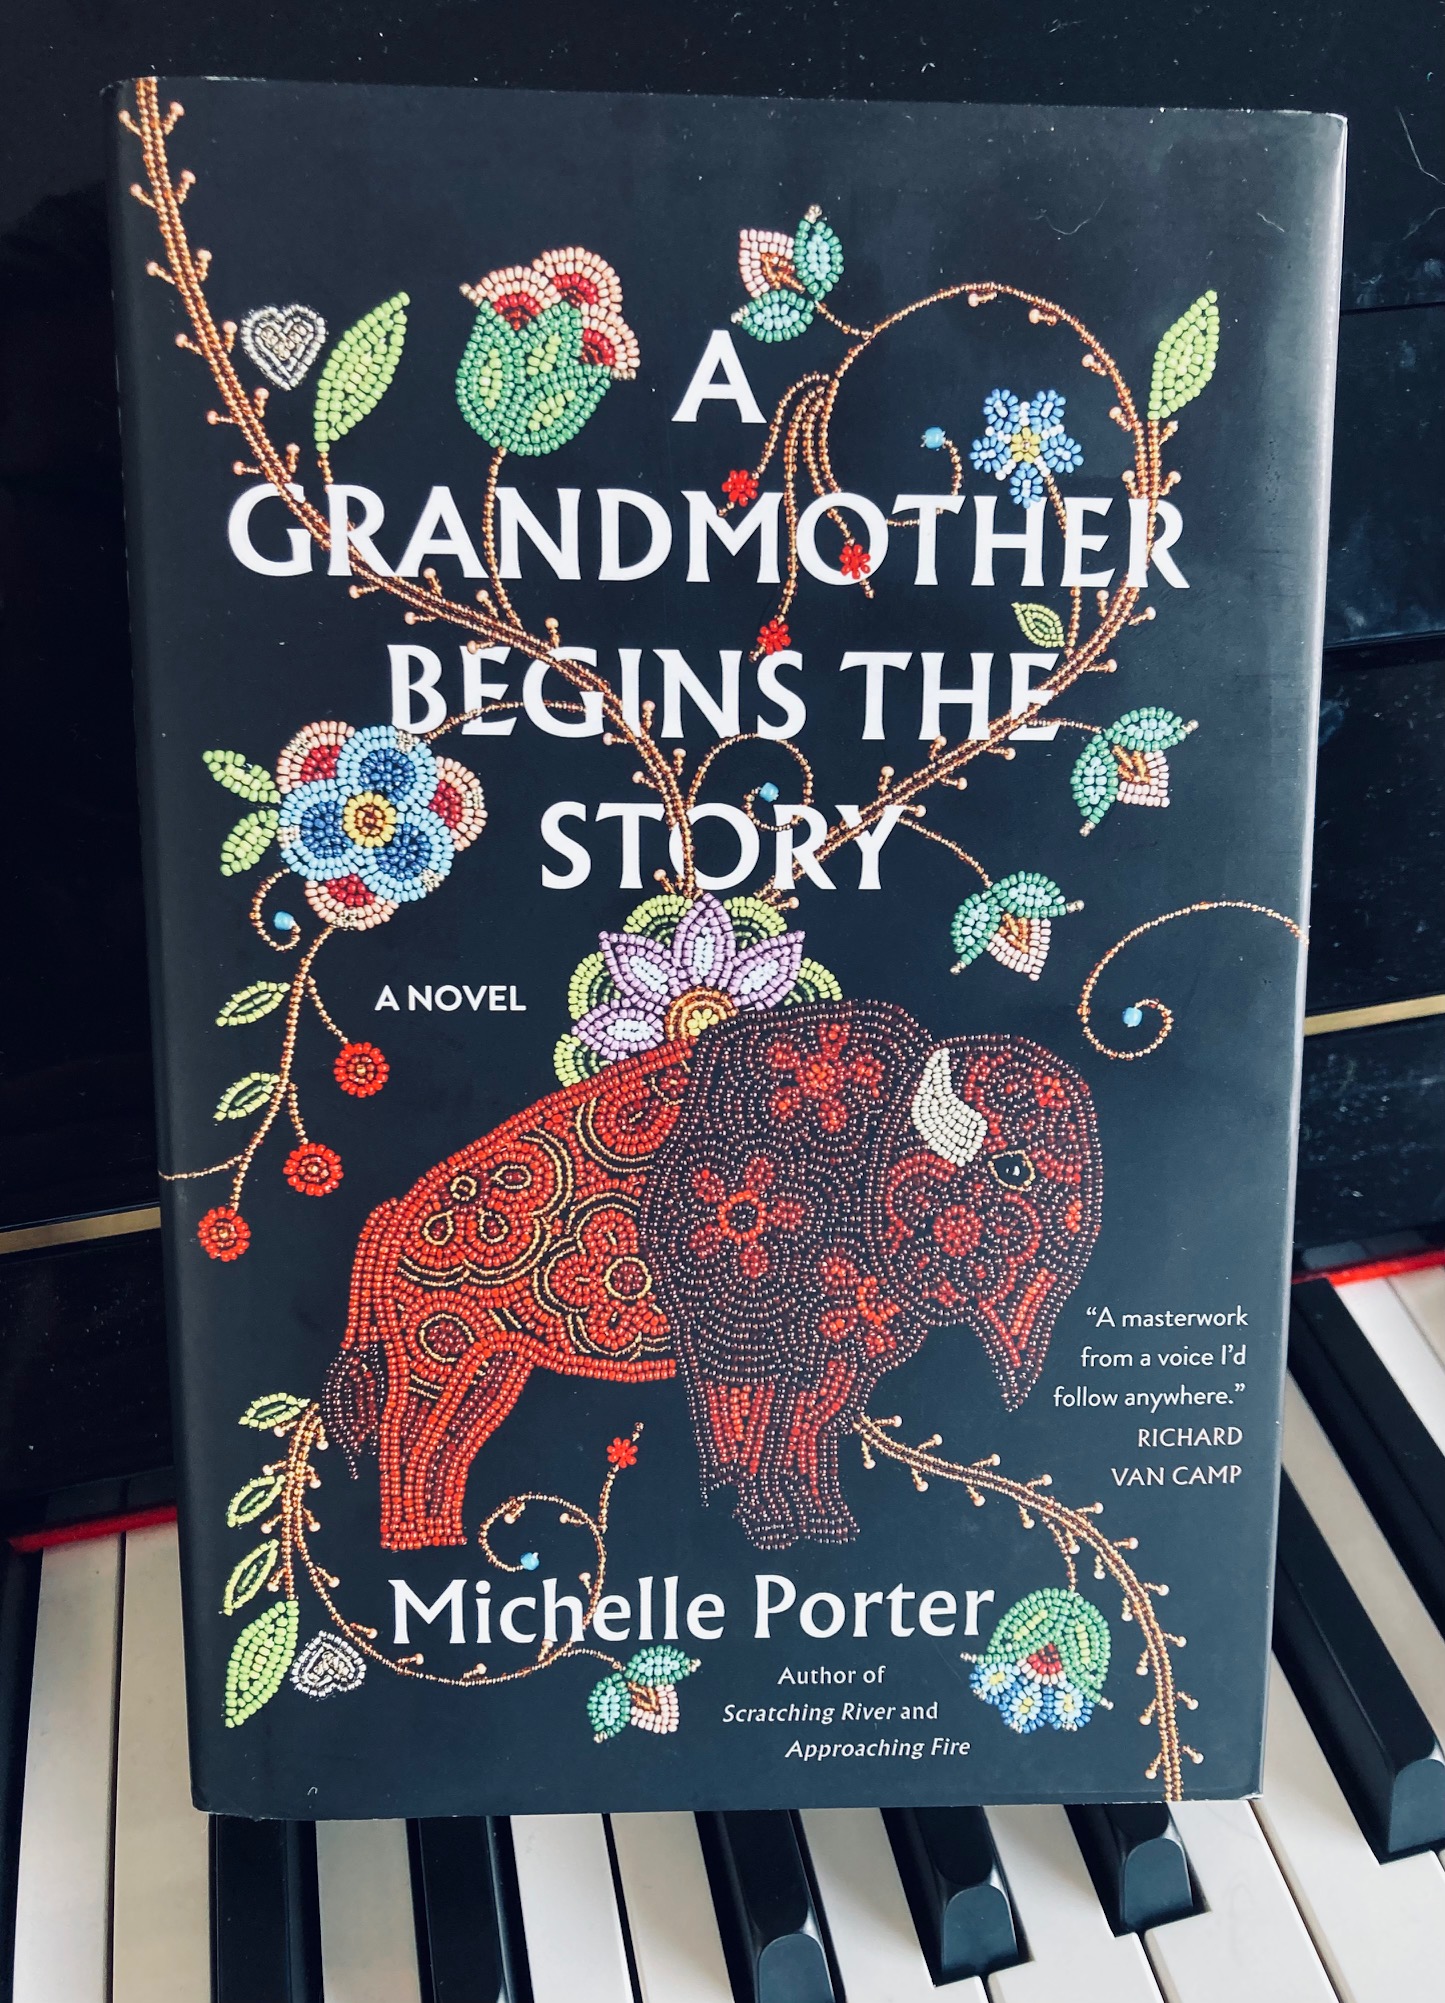 A Grandmother Begins the Story by Michelle Porter book pictured on the keys of a piano